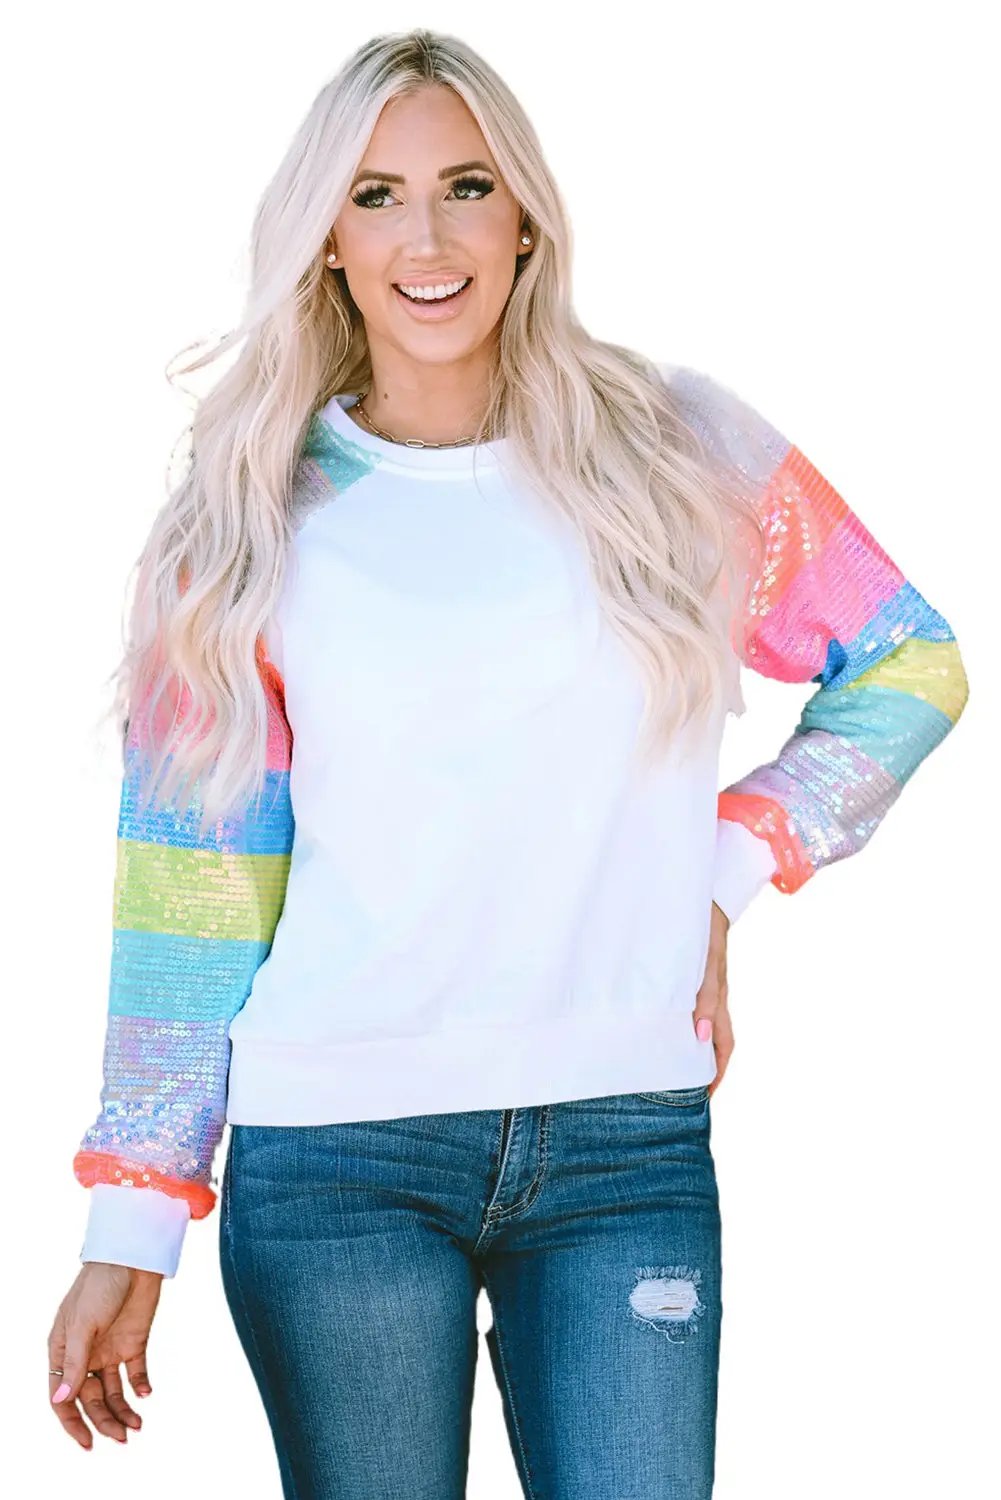 a woman with blonde hair wearing a white sweater and ripped jeans